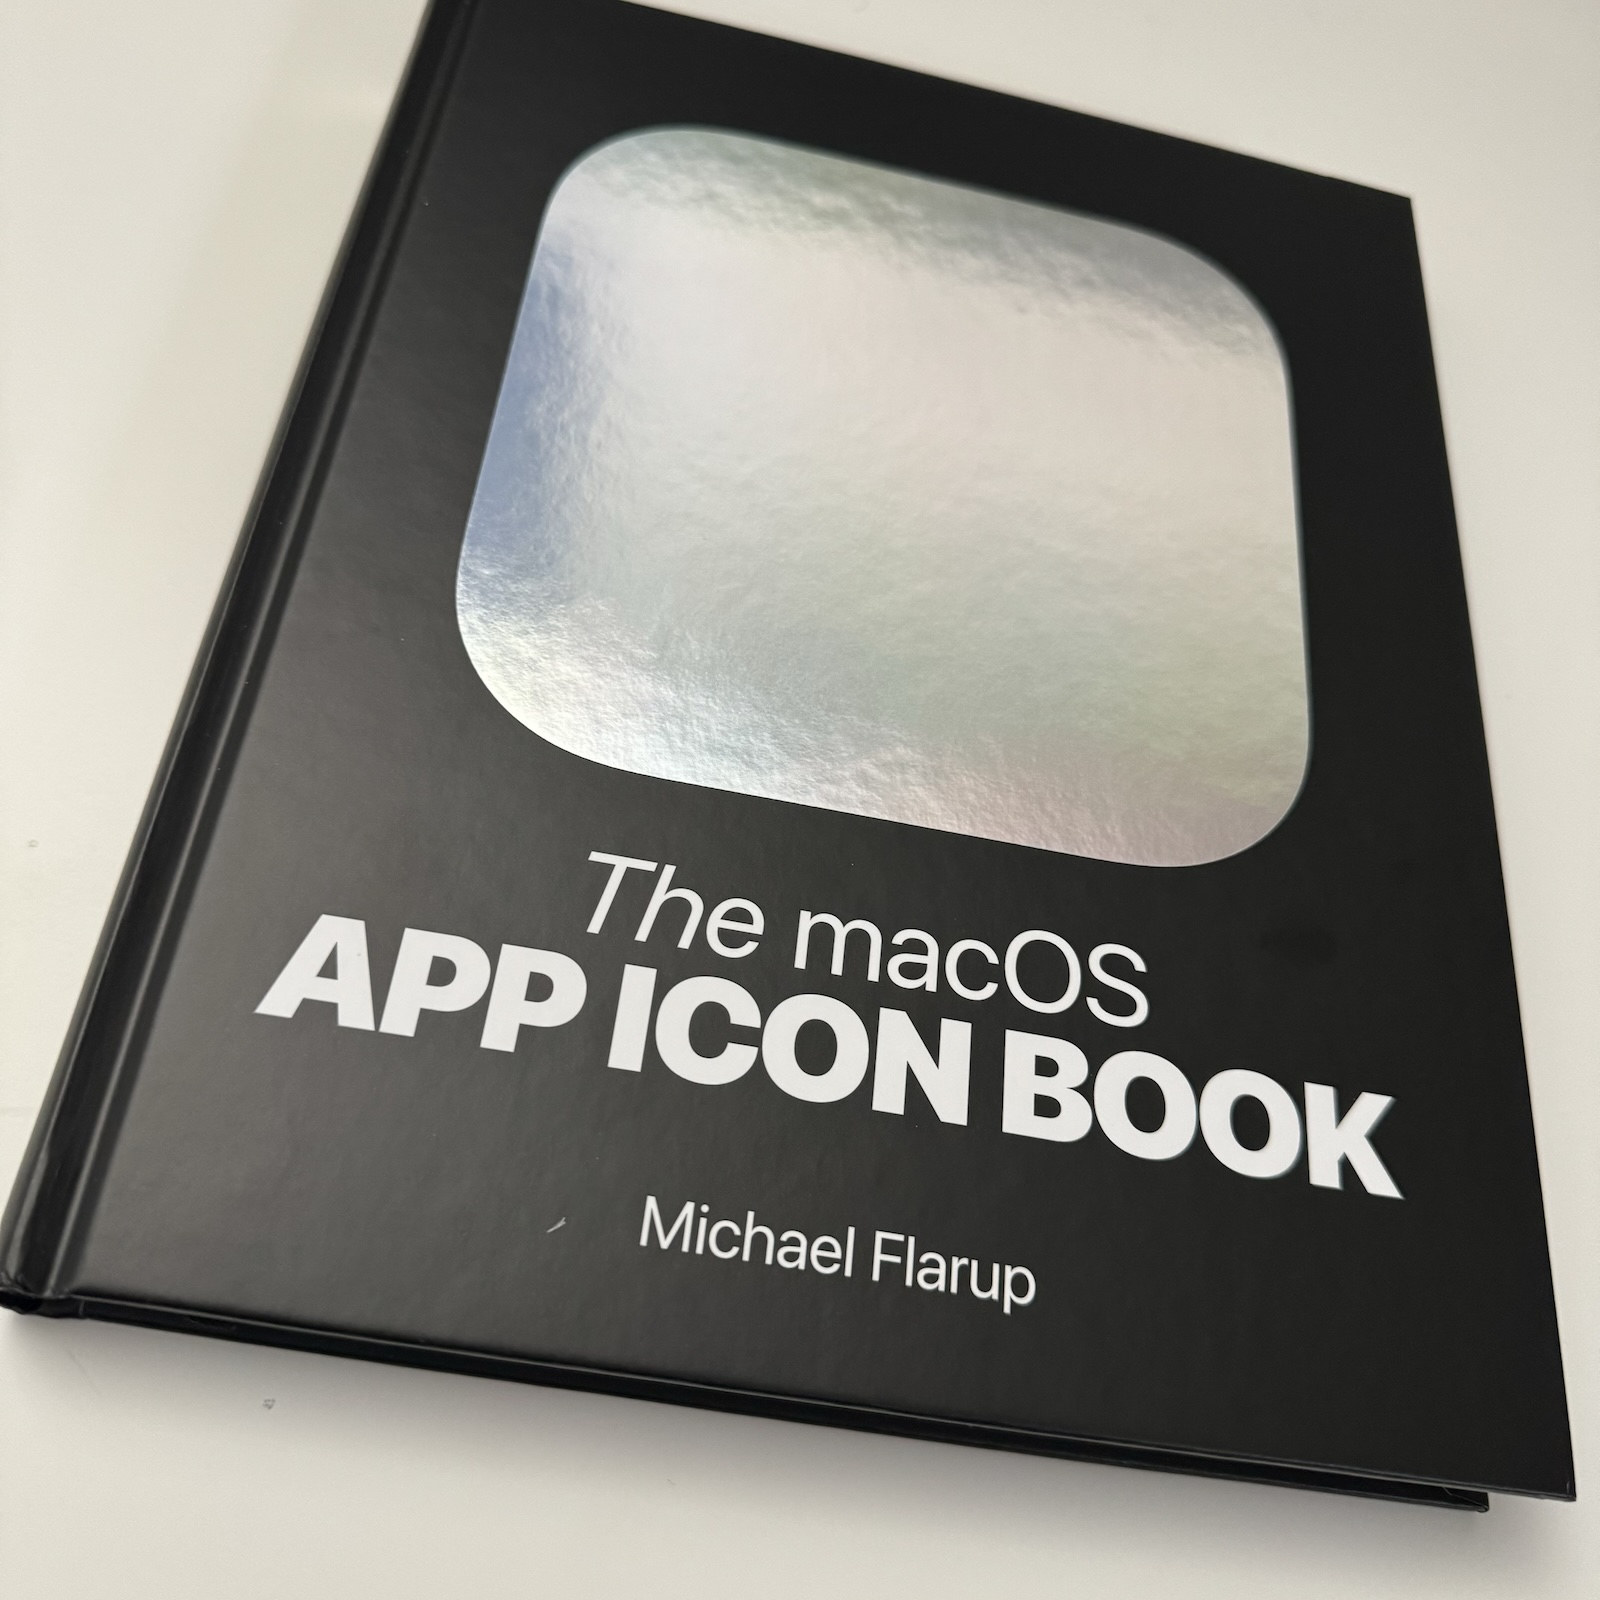 Photograph of the cover of the “The macOS App Icon Book” which is black, hardbound, and has a iOS-shaped silver foil embossing on the front.